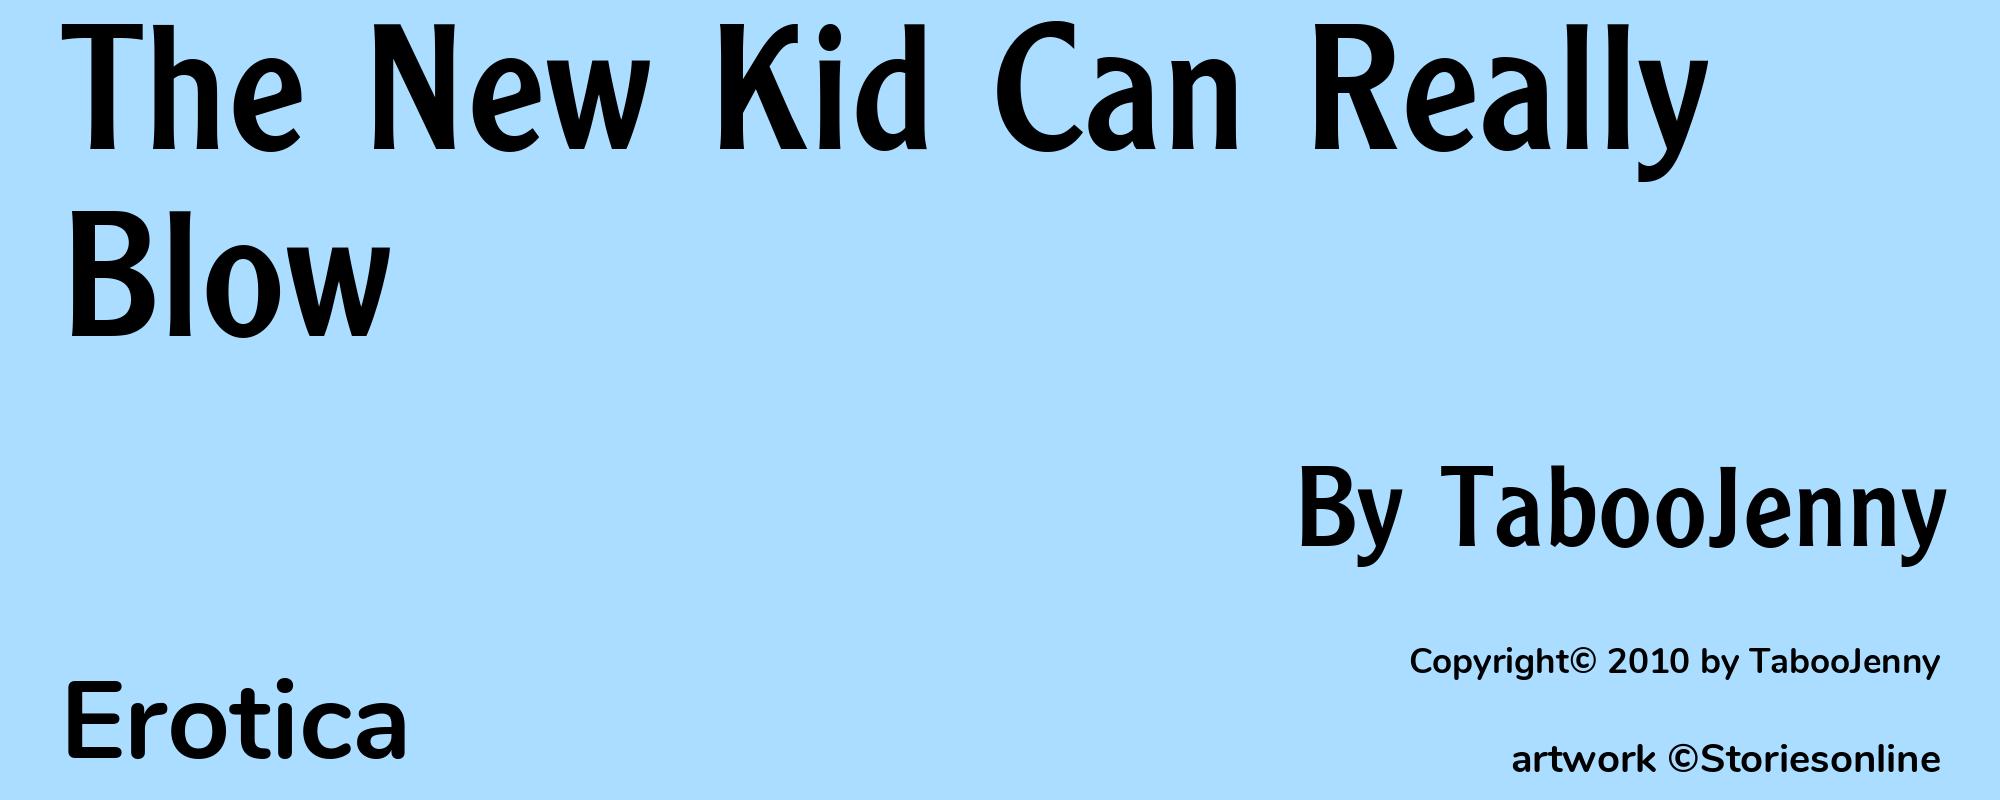 The New Kid Can Really Blow - Cover